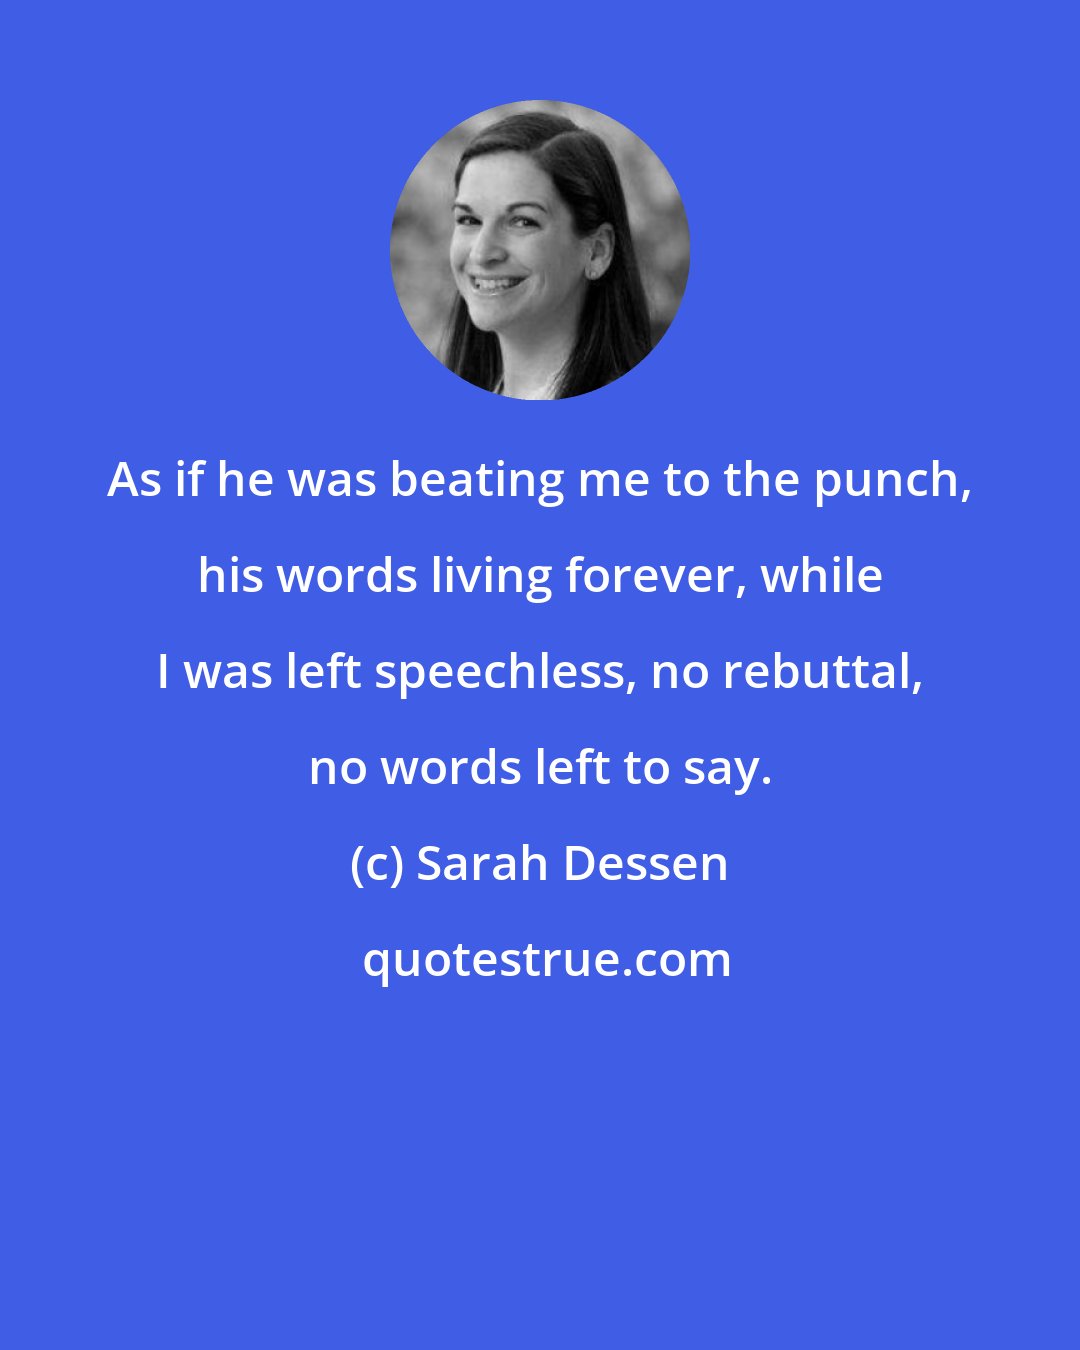 Sarah Dessen: As if he was beating me to the punch, his words living forever, while I was left speechless, no rebuttal, no words left to say.